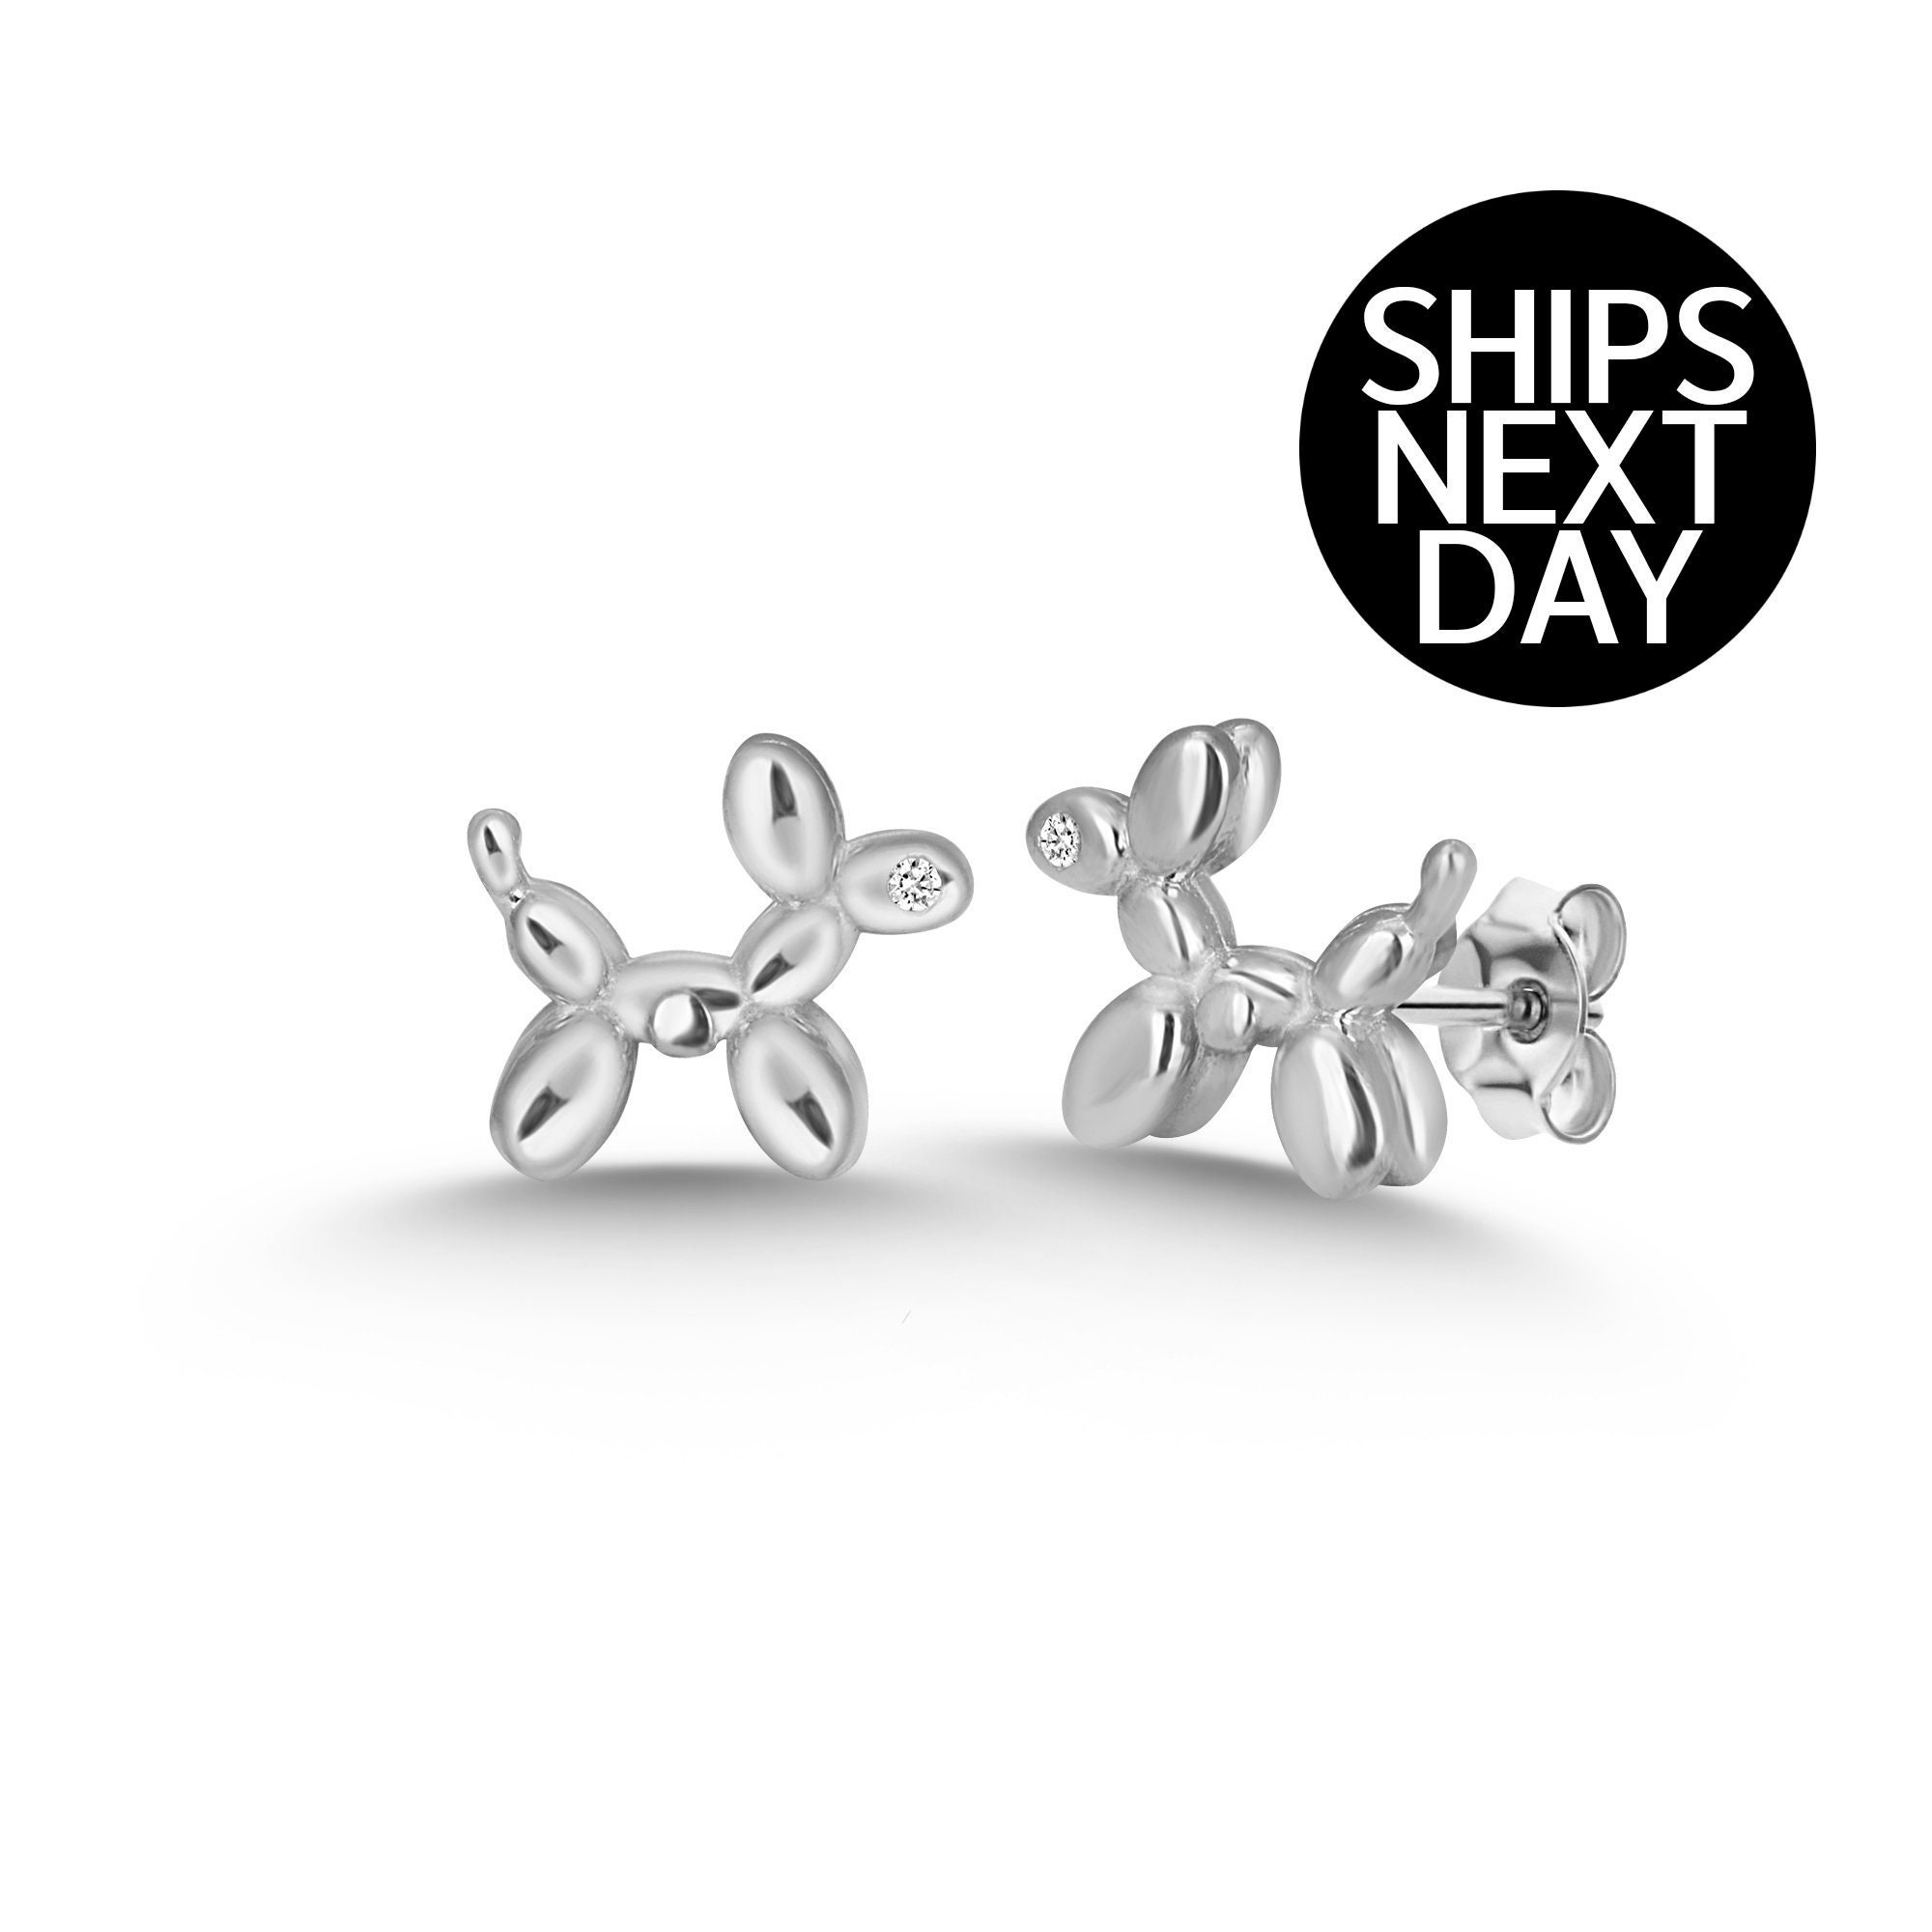 Small Stud Earrings for Women Silver Plated Balloon Dog 20G